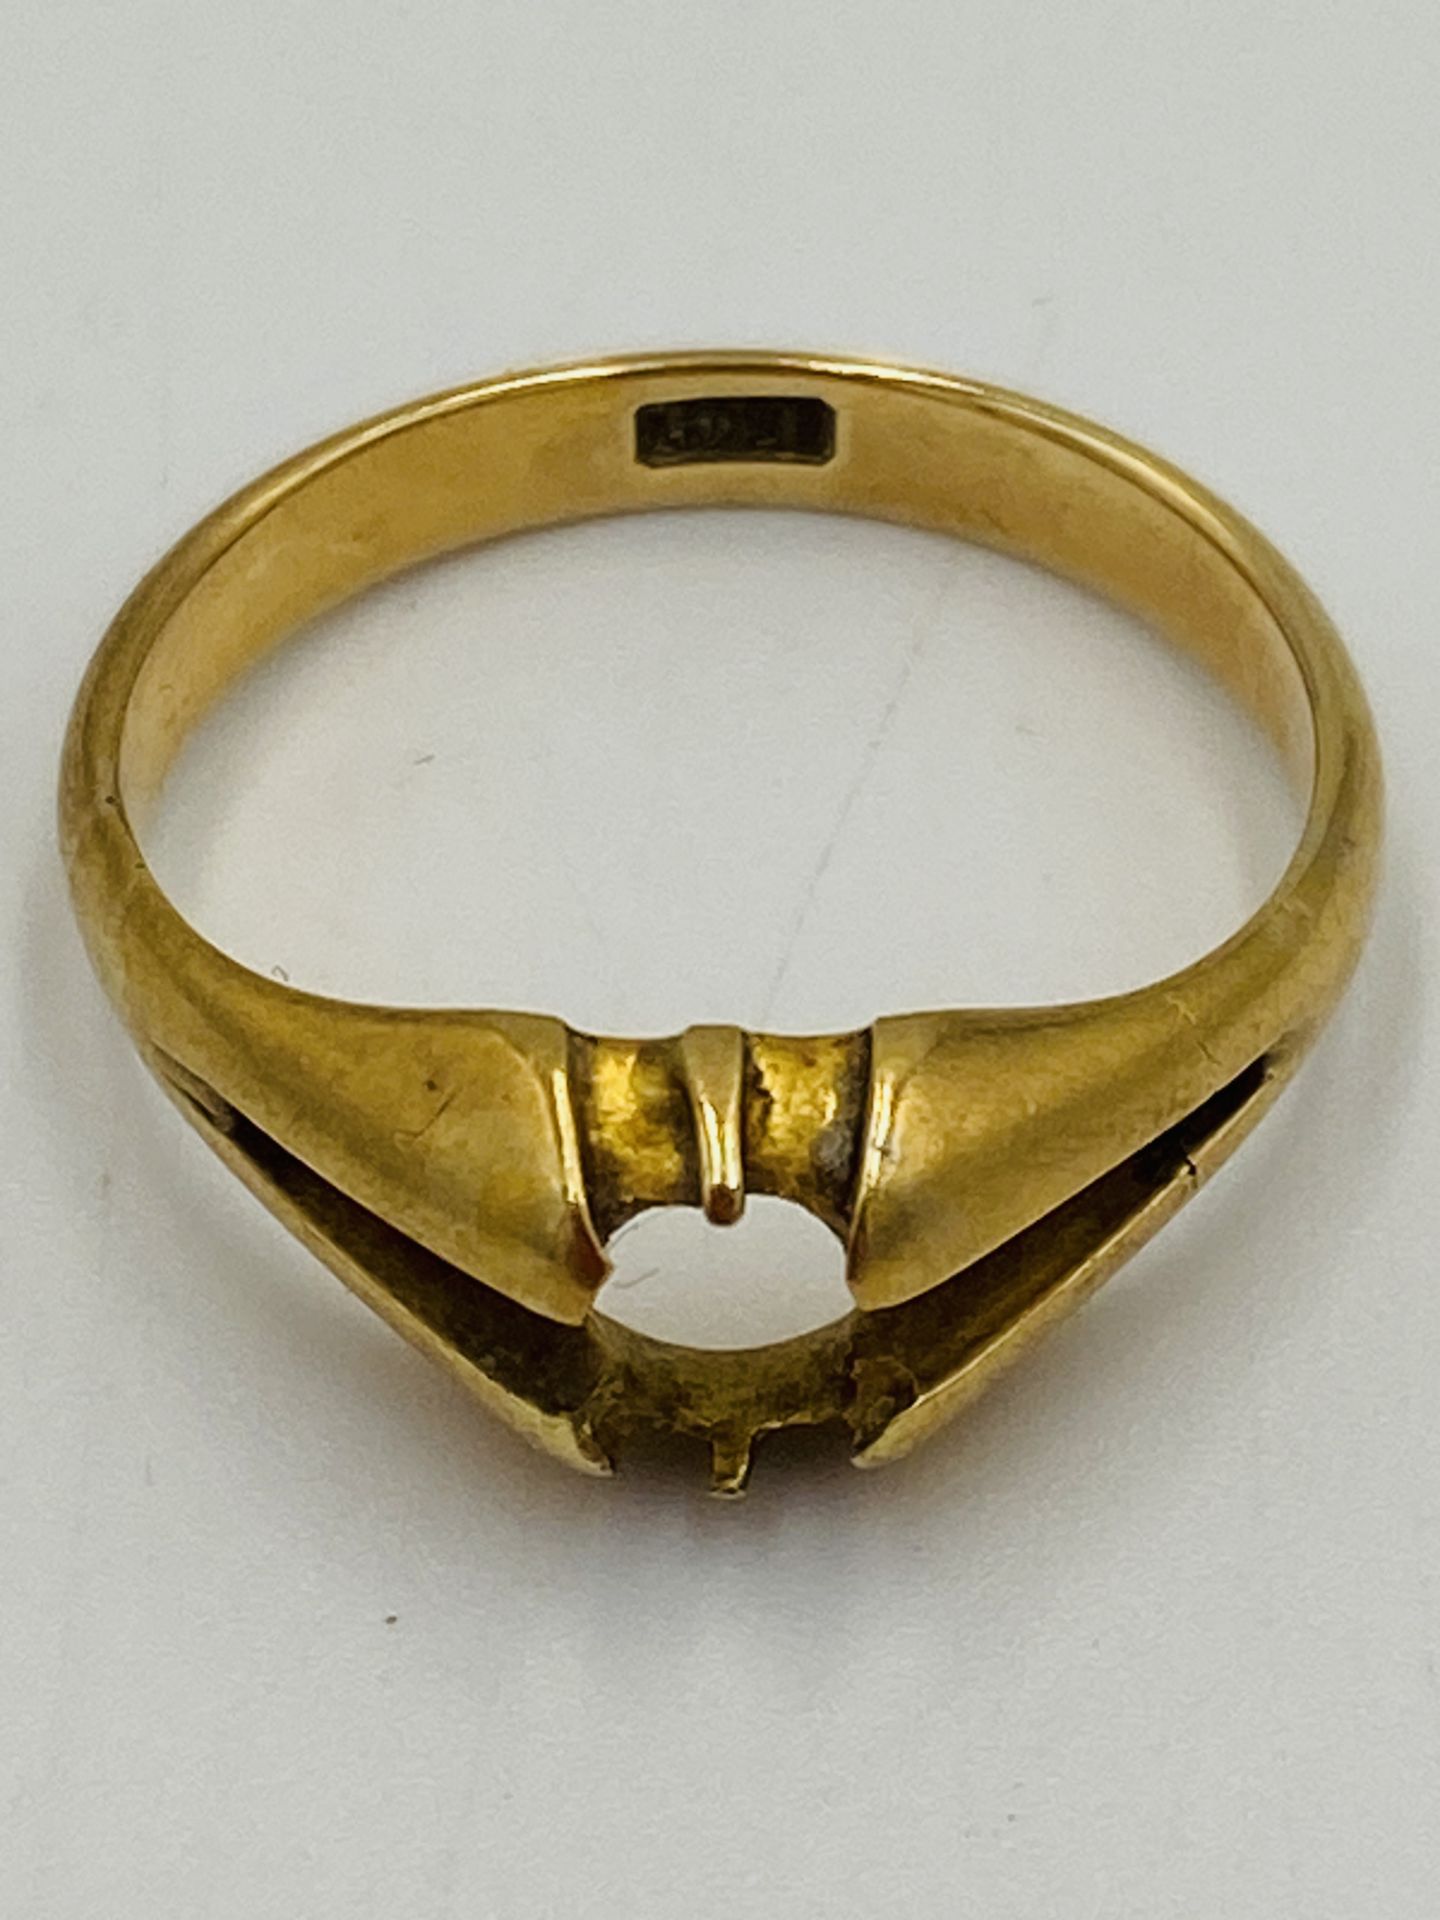 15ct gold ring together with a yellow metal ring - Image 4 of 5